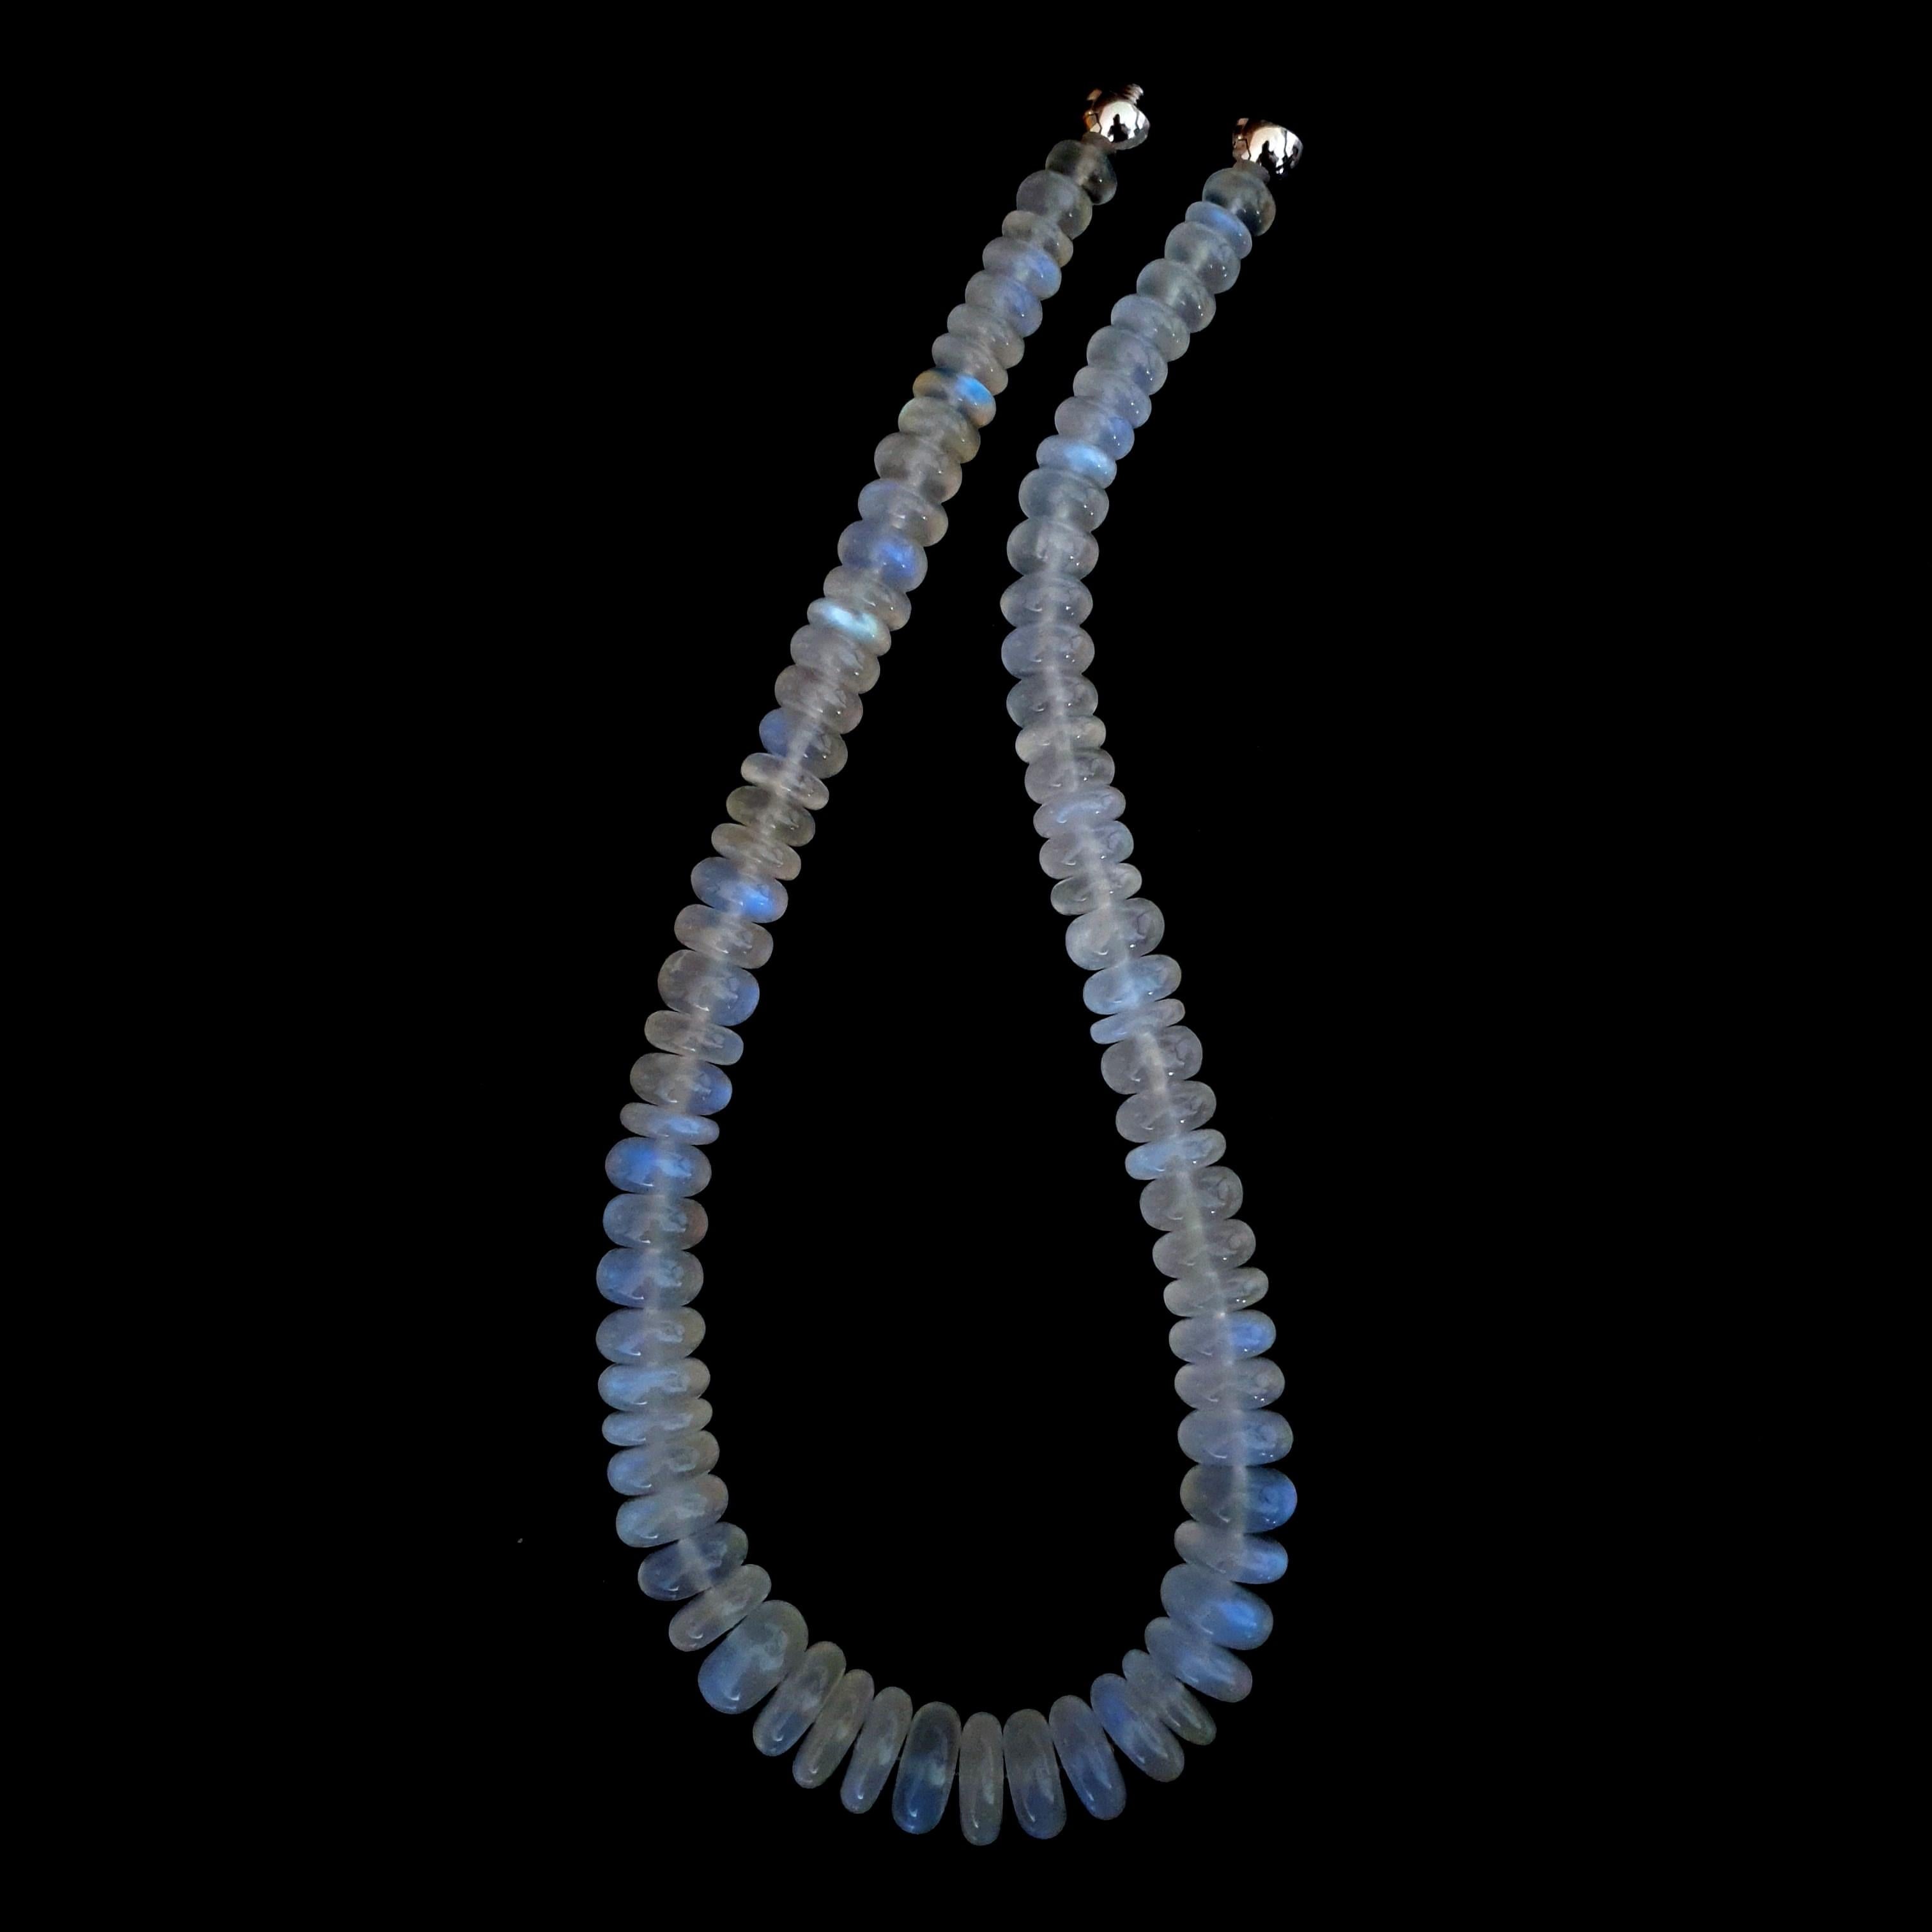 Women's Milky Blue Moonstone Rondel Beaded Necklace with 18 Carat White Gold Clasp For Sale